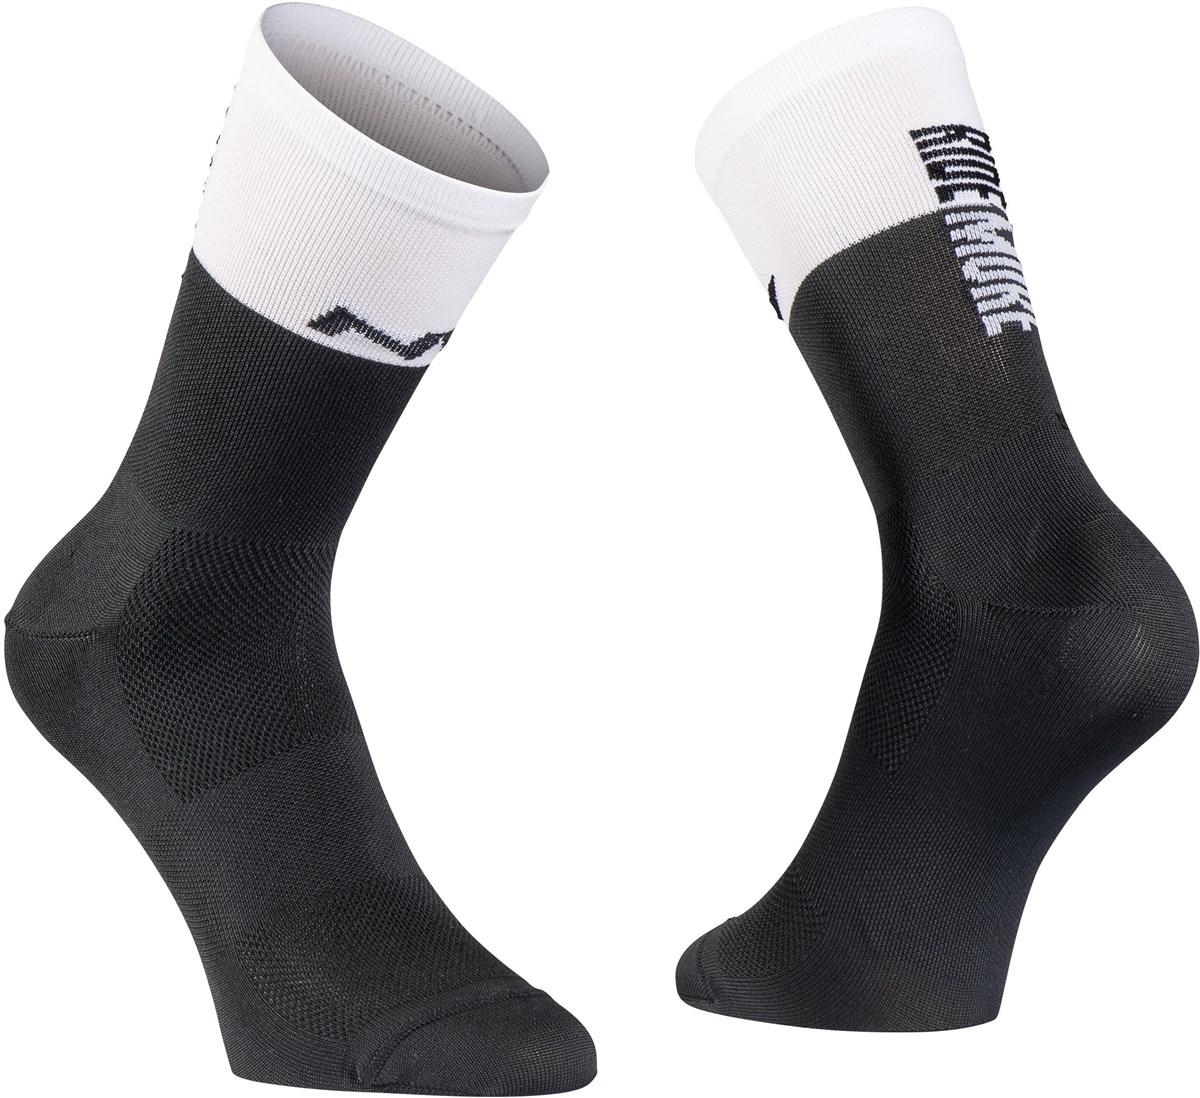 Northwave Work Less Ride More Cycling Socks product image